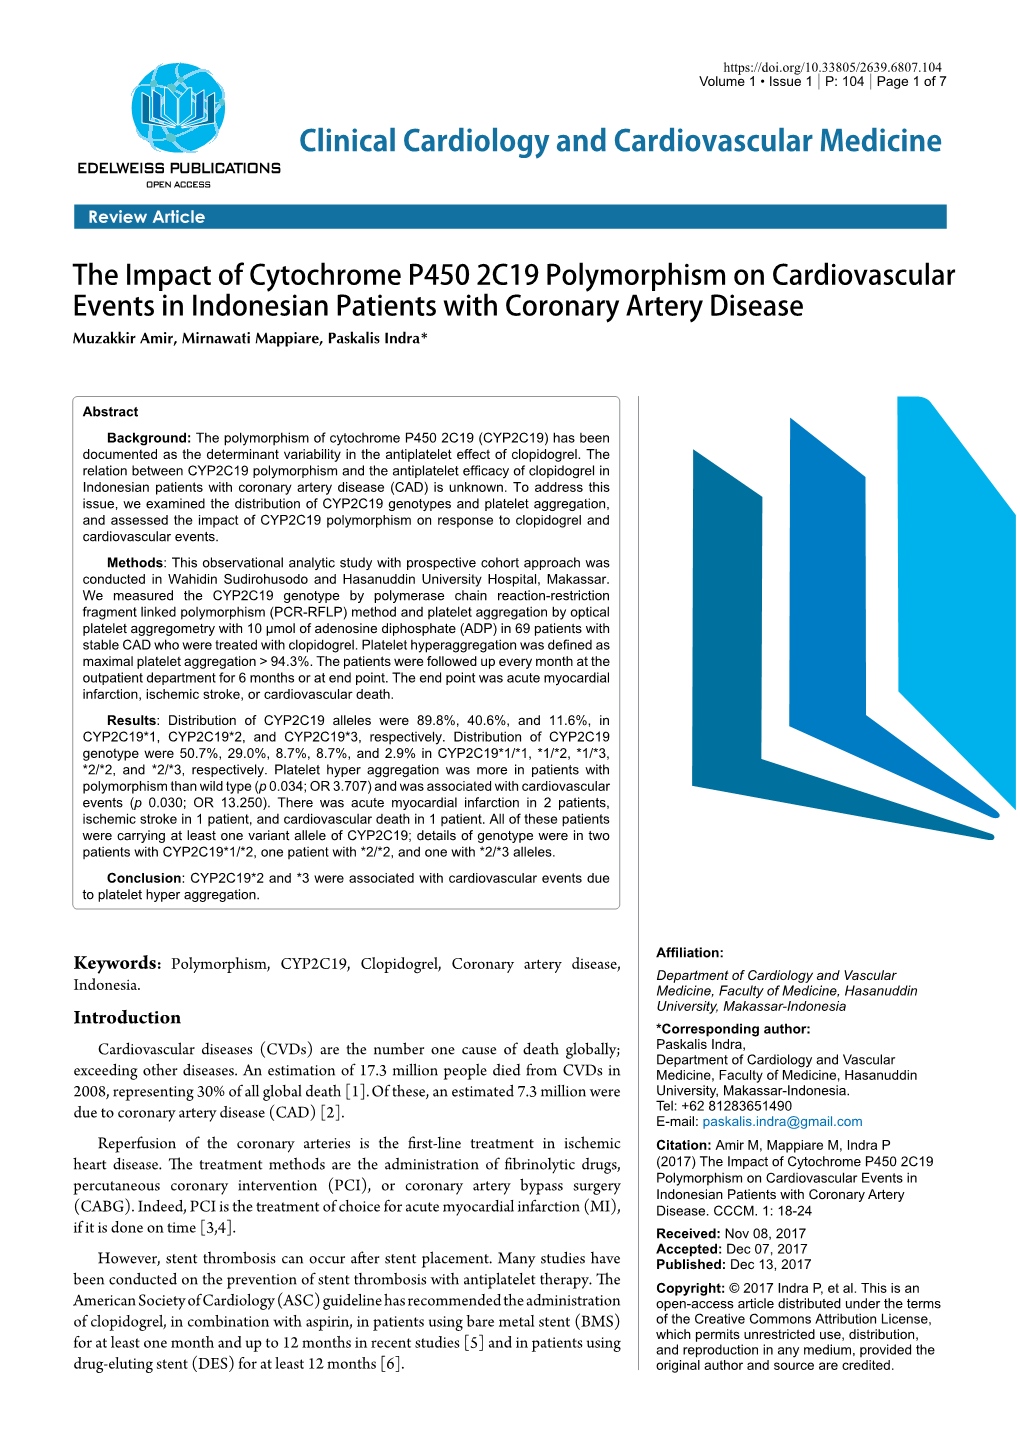 The Impact of Cytochrome P450 2C19 Polymorphism on Cardiovascular